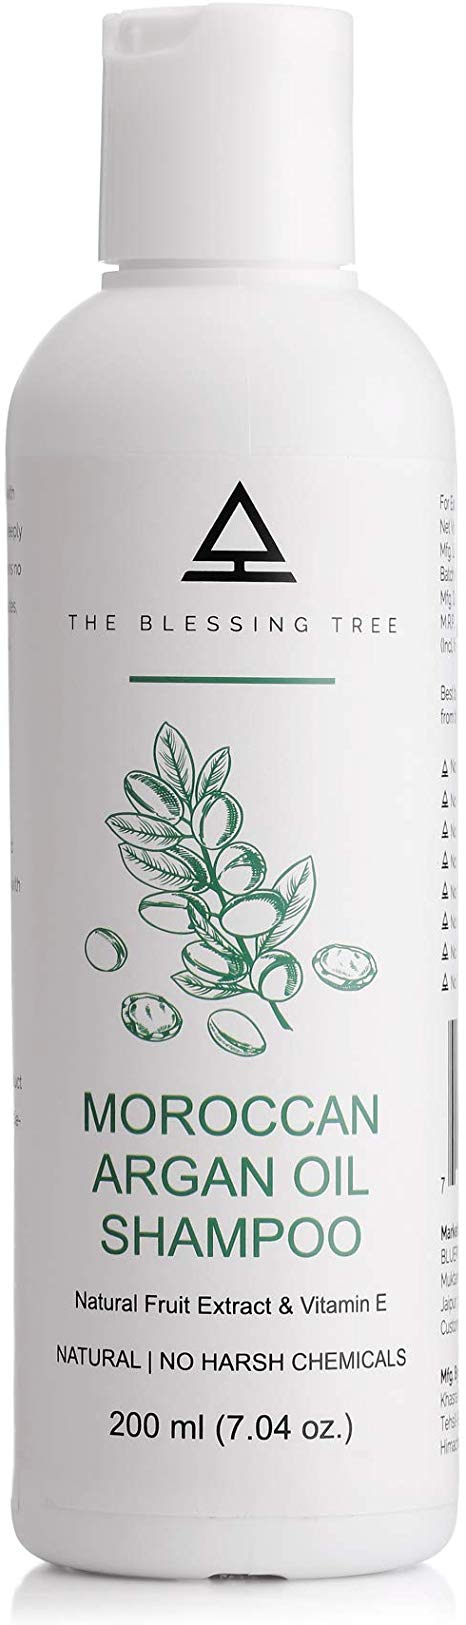 The Blessing Tree Moroccan Argan Oil Shampoo. No Paraben, No Sulphates, No harsh chemicals. 200ml